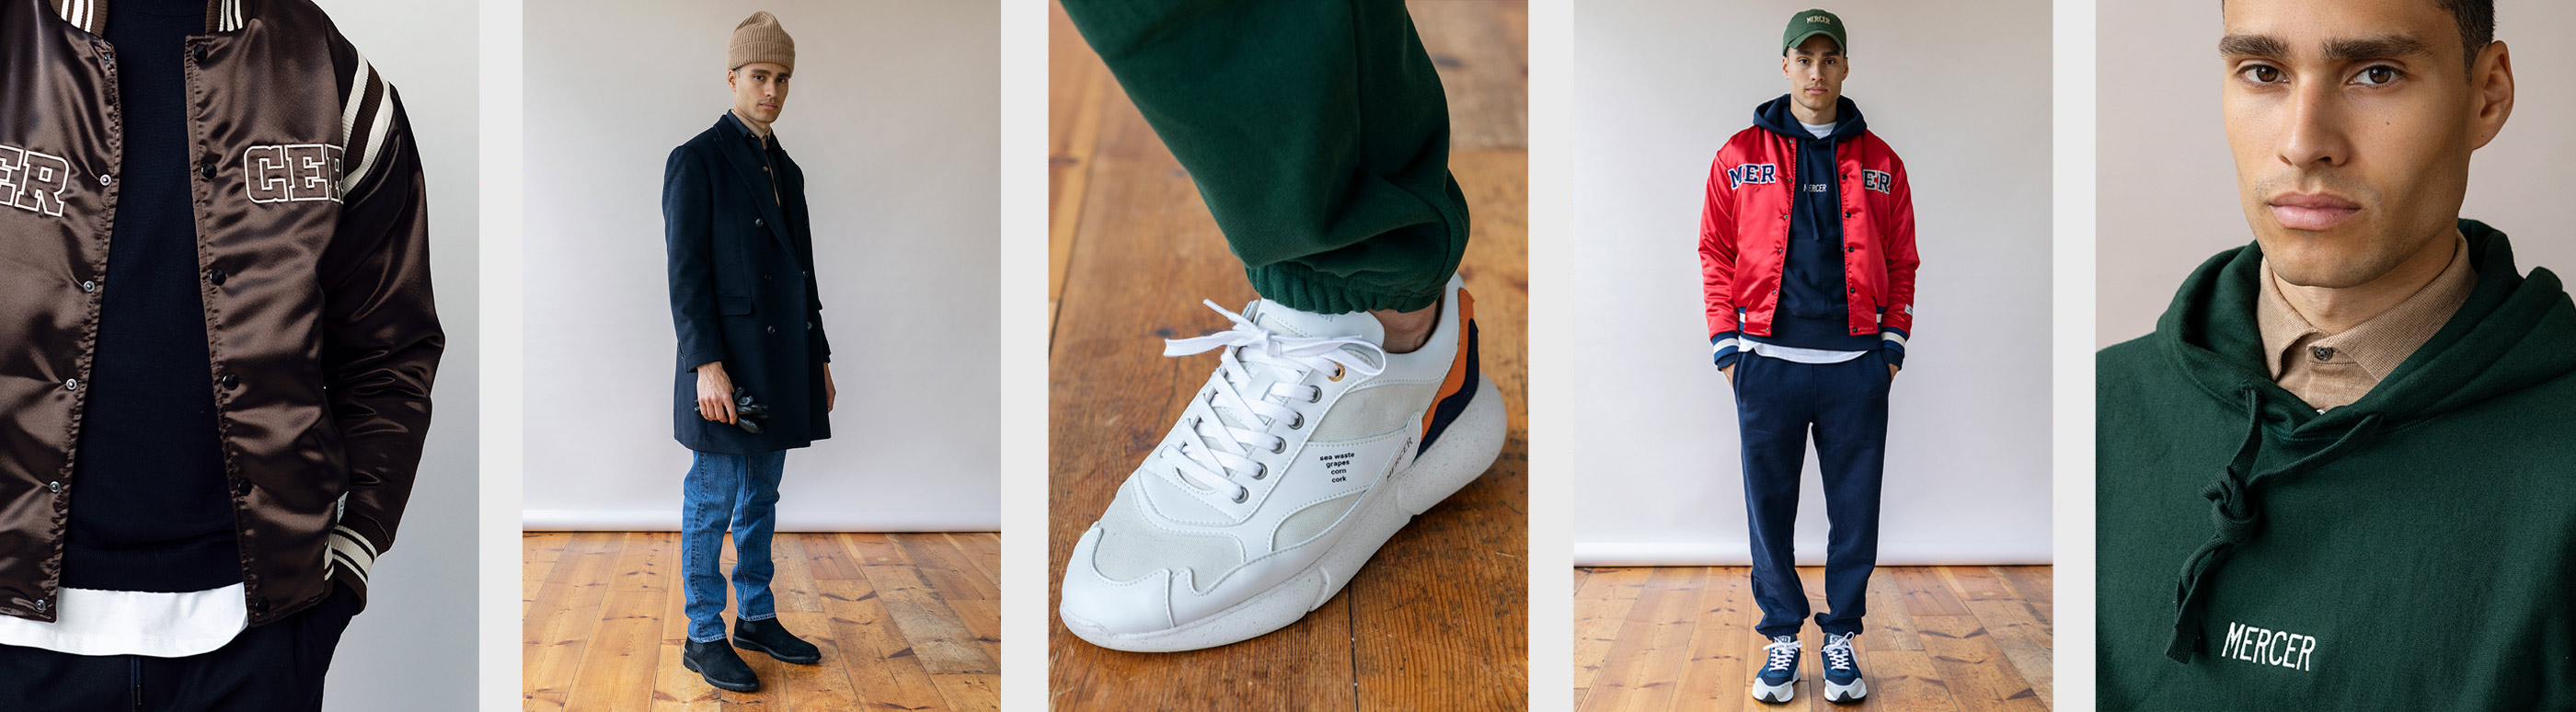 Shop Mercer footwear, apparel and accessories |  Free Worldwide Shipping* ✓ Pay later with Klarna ✓ Secured payment methods